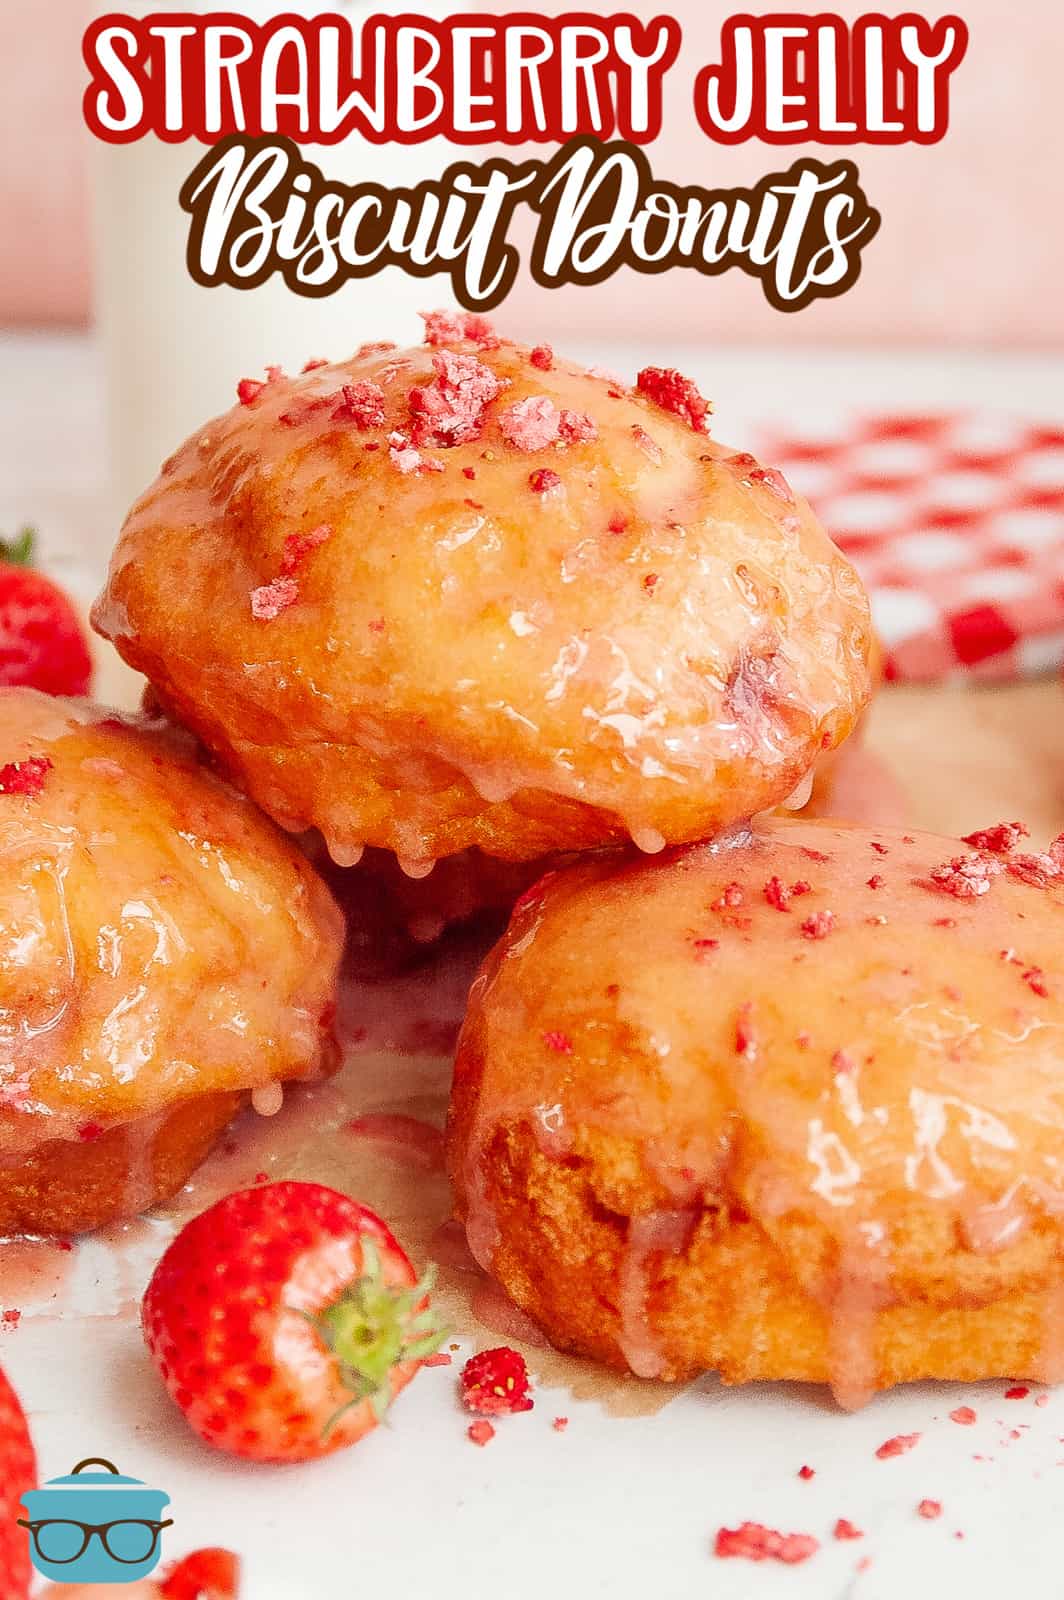 Pinterest image of Strawberry Jelly Filled Biscuit Donuts on plate.